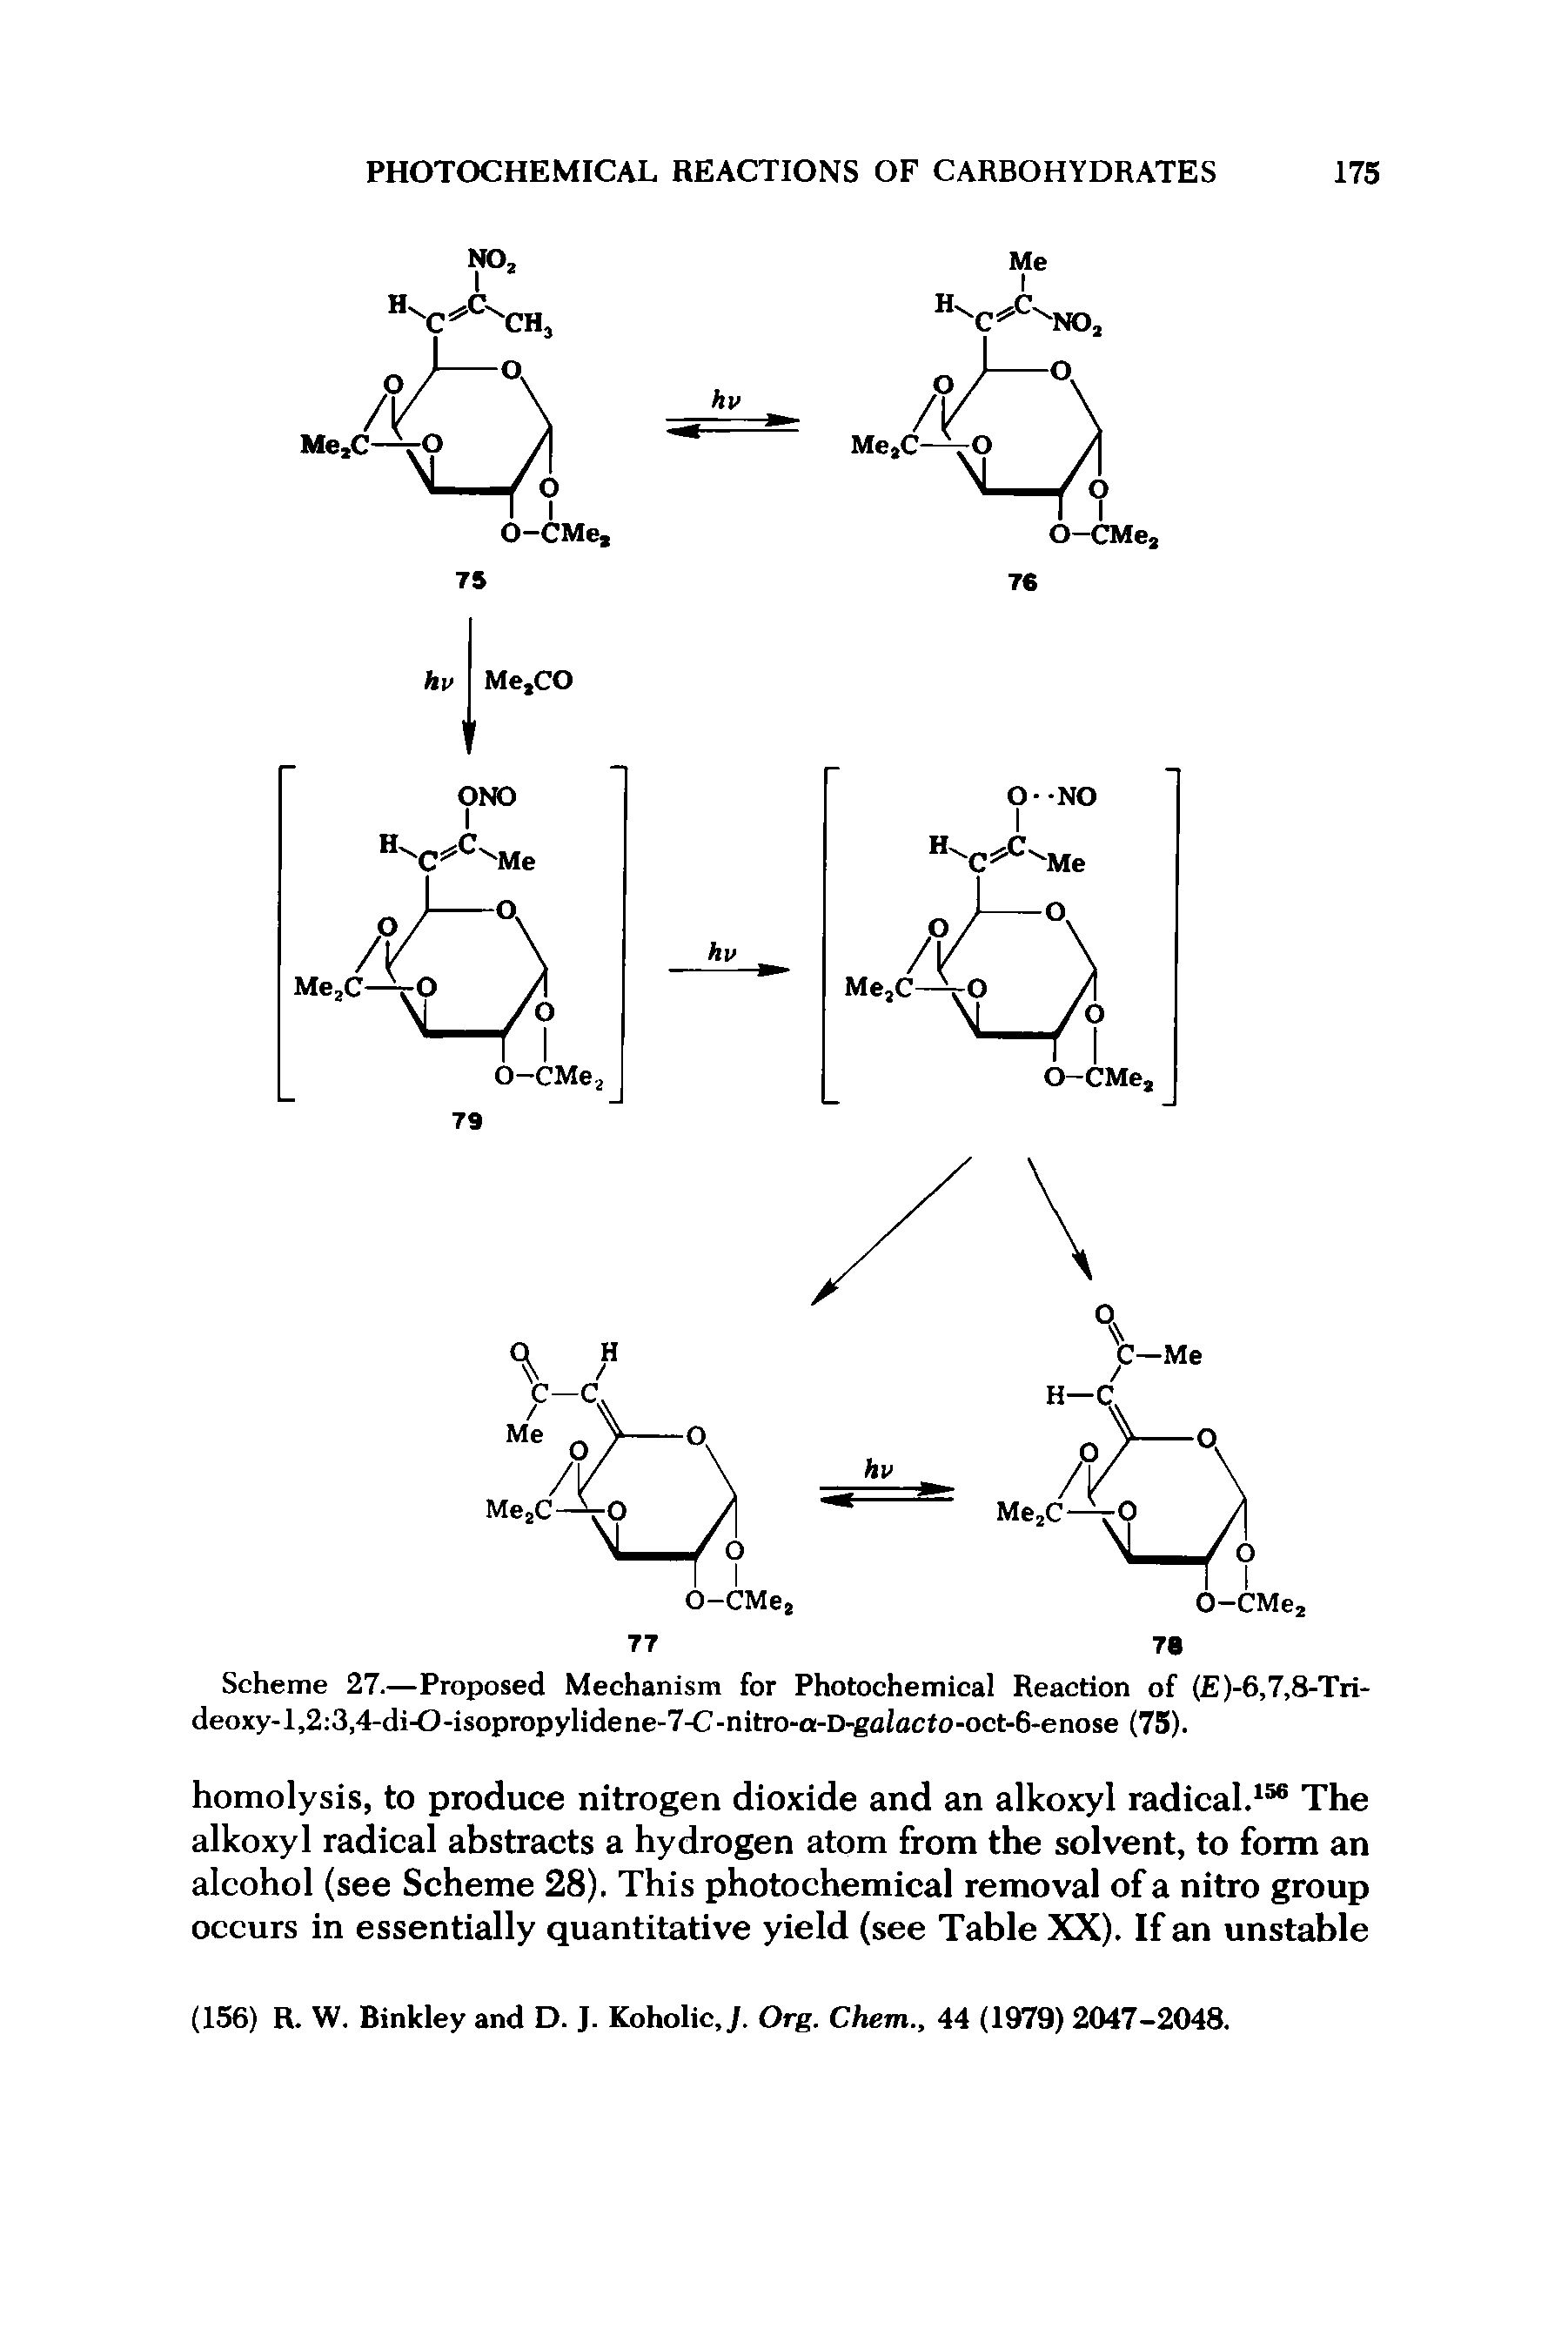 Scheme 27.—Proposed Mechanism for Photochemical Reaction of (E)-6,7,8-Tri-deoxy-l,2 3,4-di-0-isopropylidene-7-C-nitro-a-D-galacfo-oct-6-enose (75).